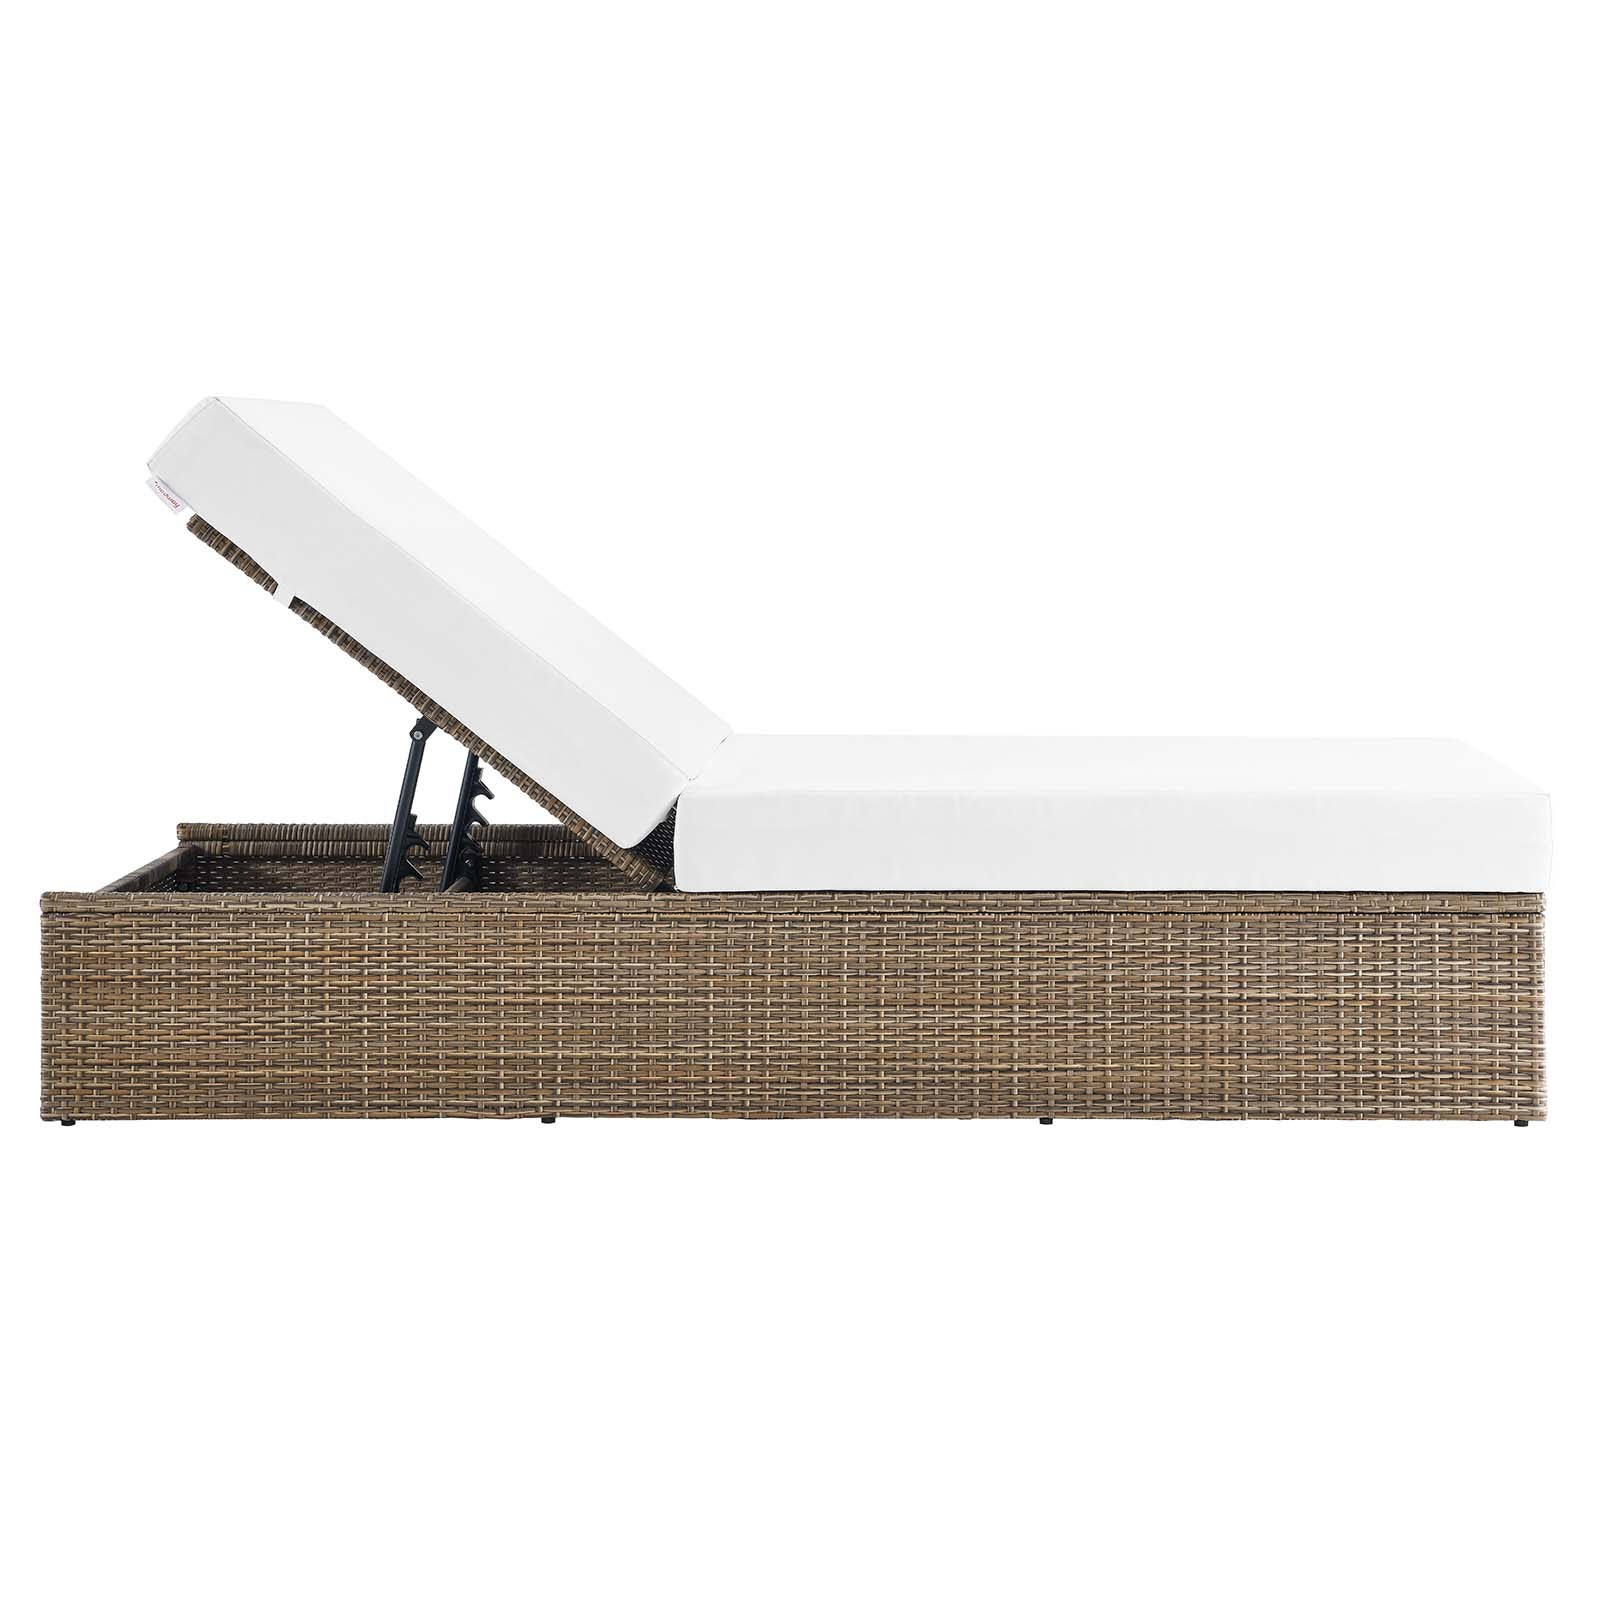 Convene Outdoor Patio Outdoor Patio Chaise Lounge Chair - East Shore Modern Home Furnishings